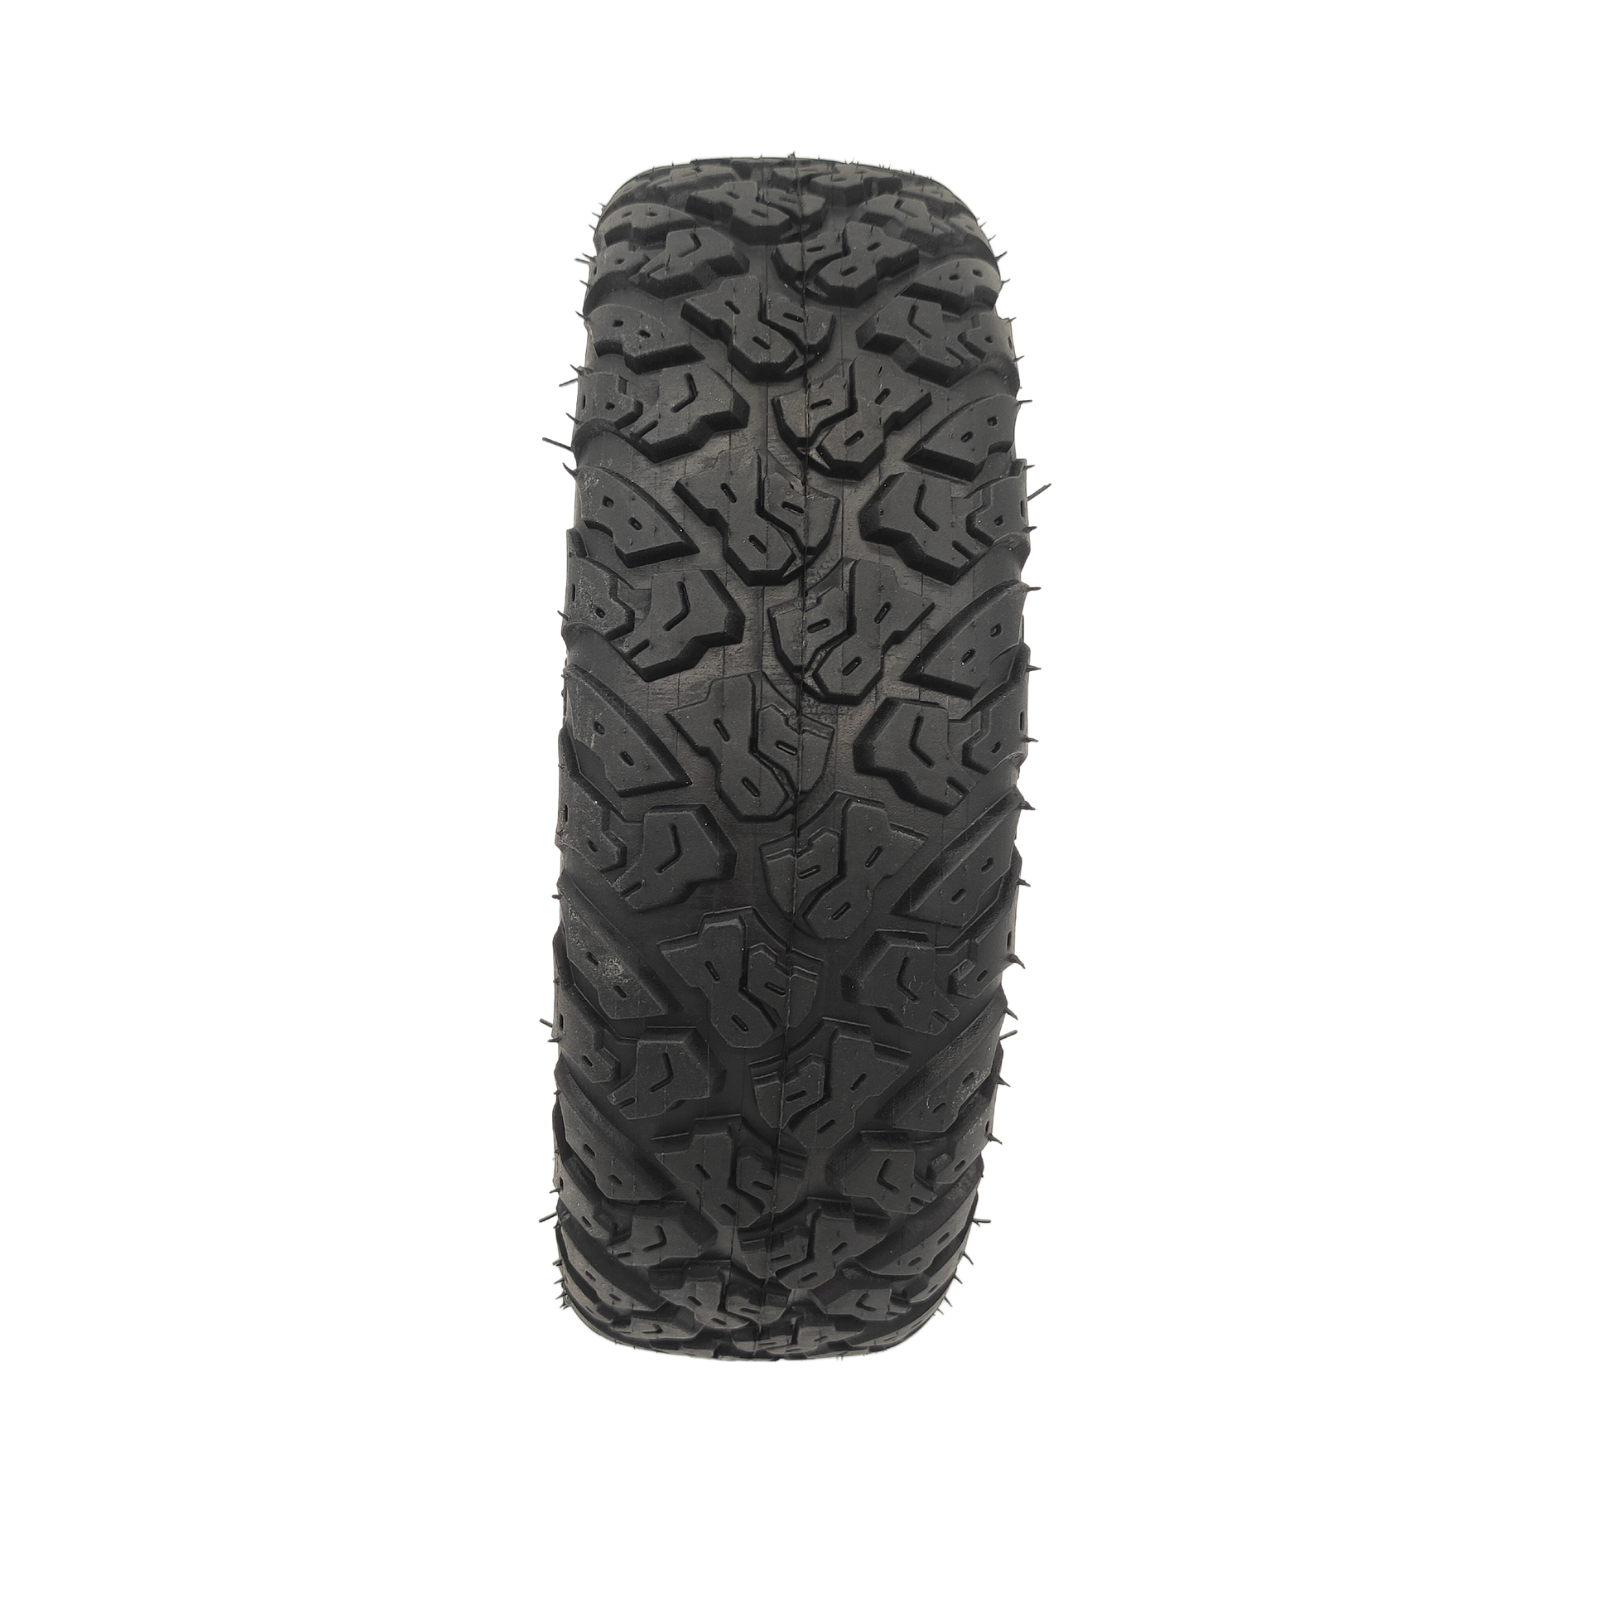 Odys Alpha X3 Pro off-road tire tubeless 10x2.5-6.5 inch with valve af